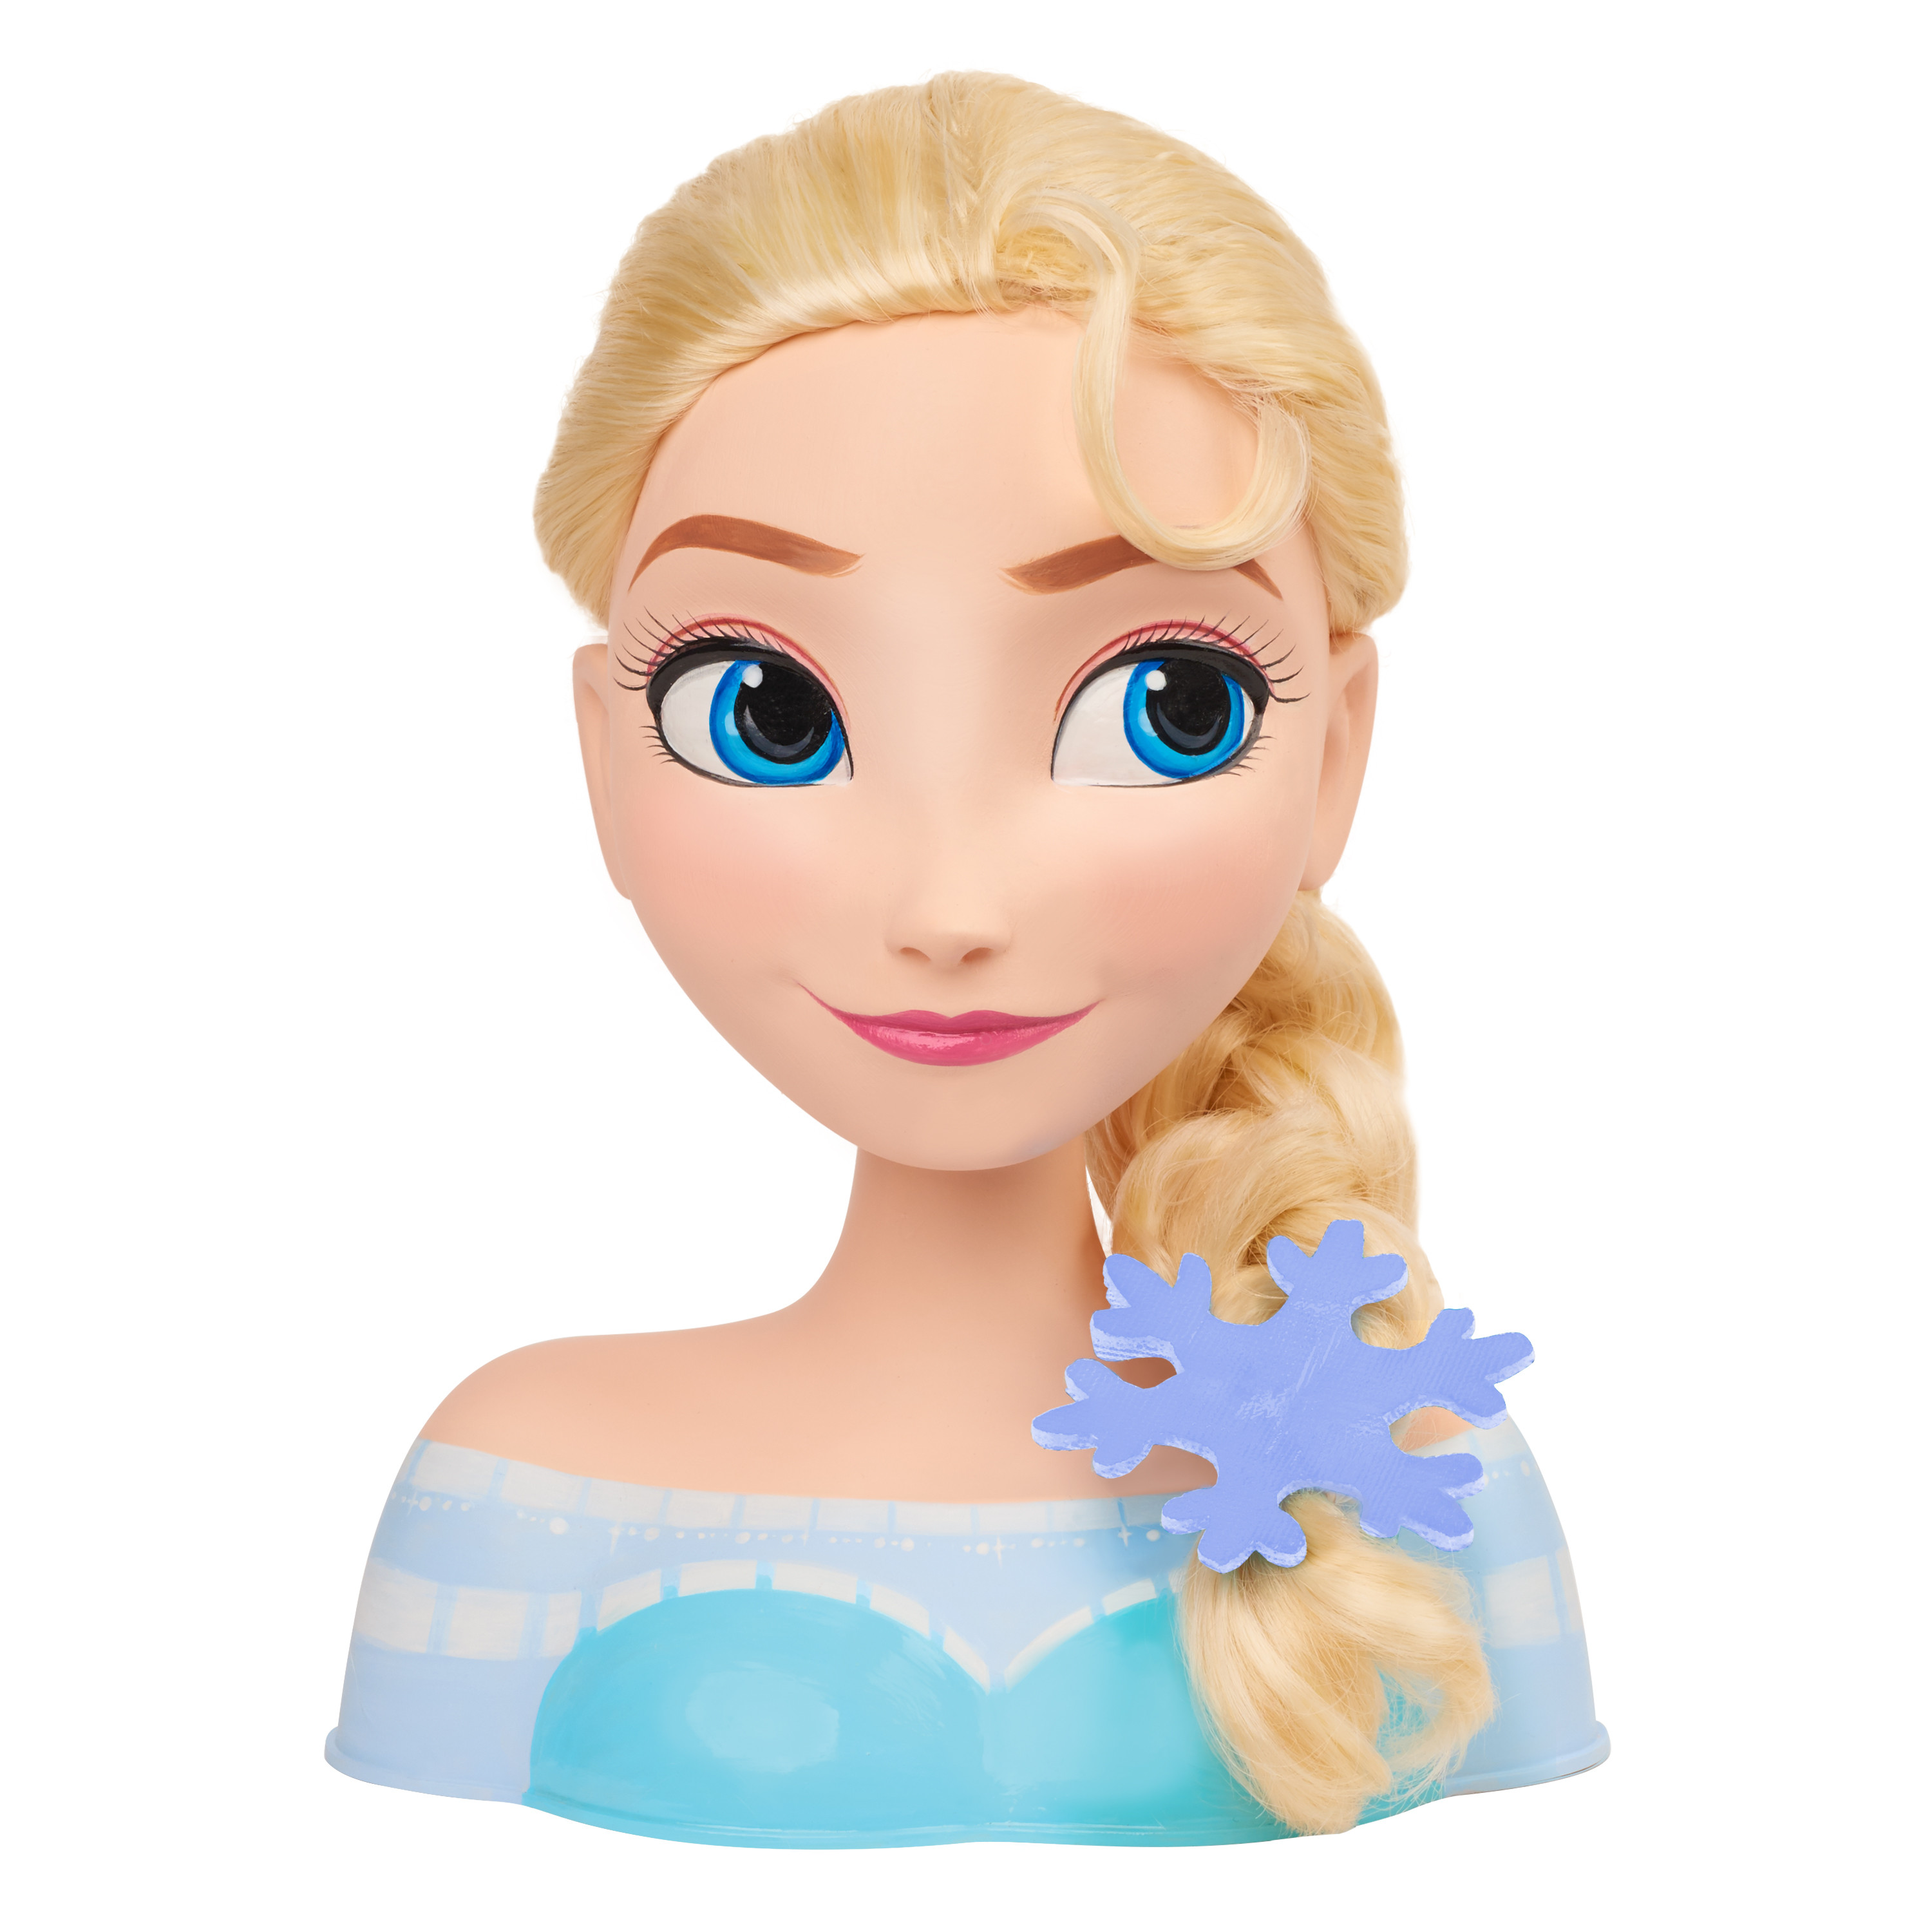 Disney Frozen Elsa Styling Head, Officially Licensed Kids Toys for Ages 3 Up, Gifts and Presents - image 1 of 2